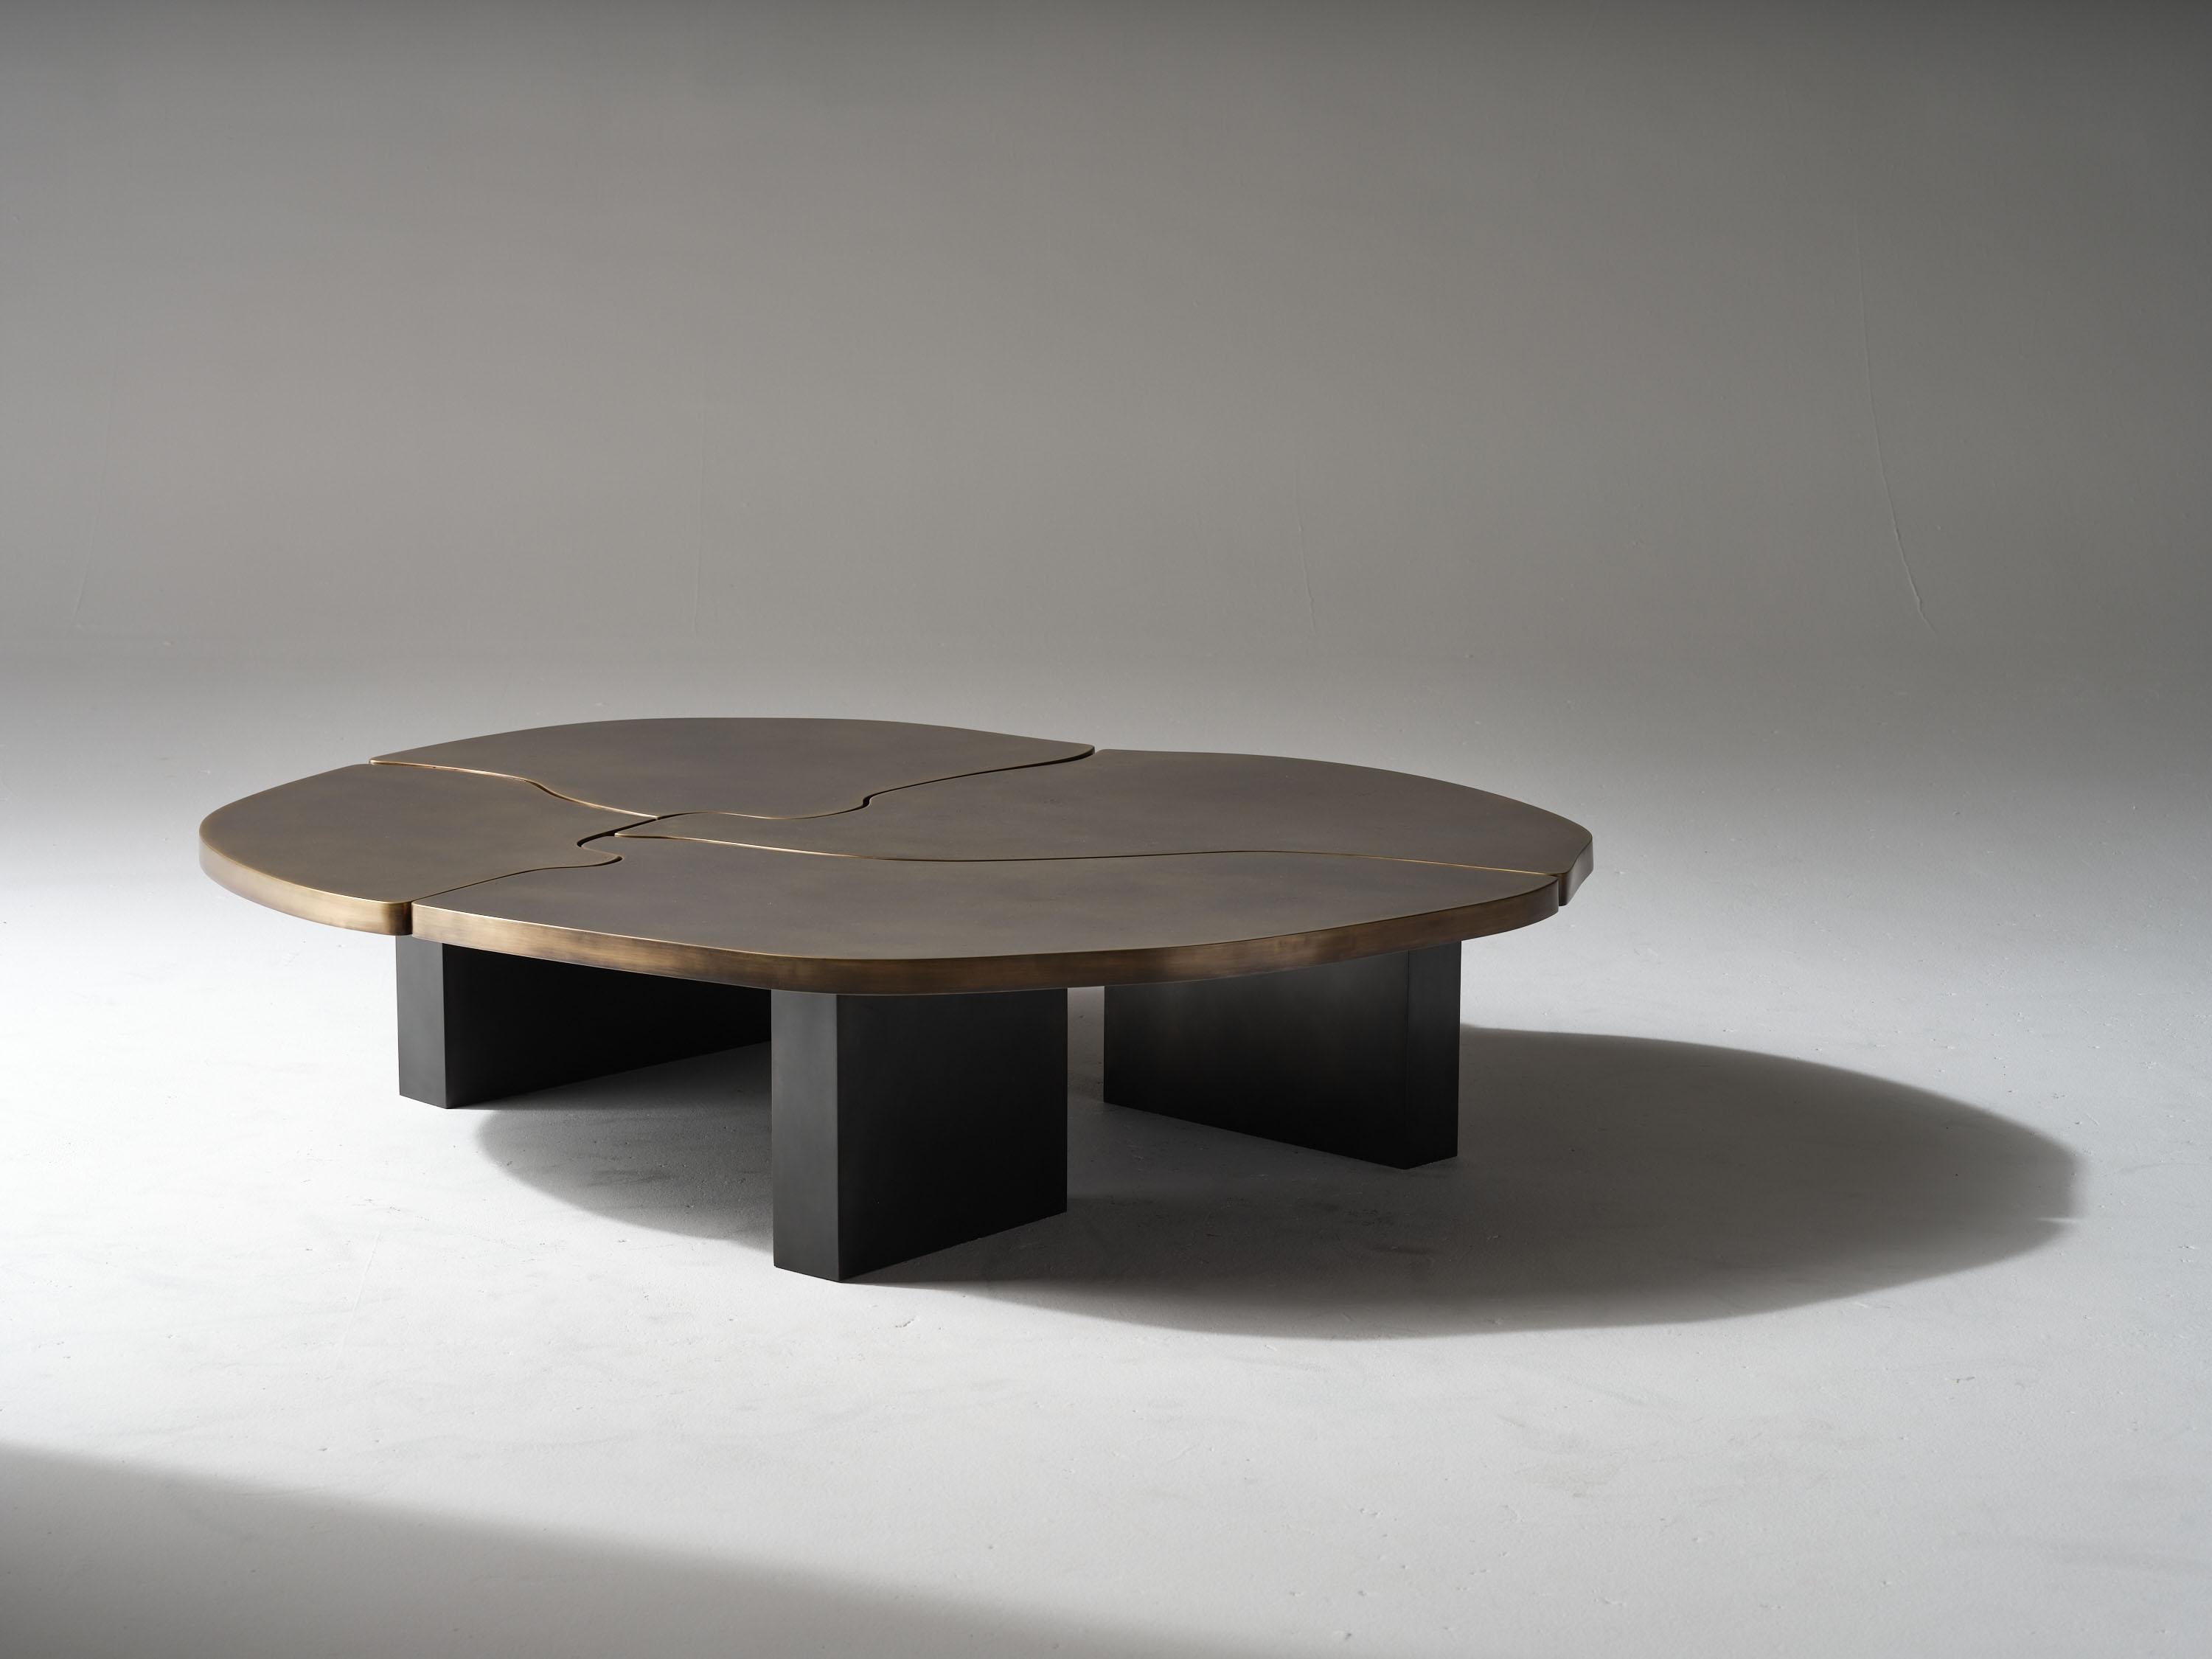 Drawing from his knowledge of art and design (in addition to his architectural expertise), Douglas Fanning continually pushes the boundaries between form and physics to create clean, fluid, yet uncompromisingly daring pieces. His multi-disciplined